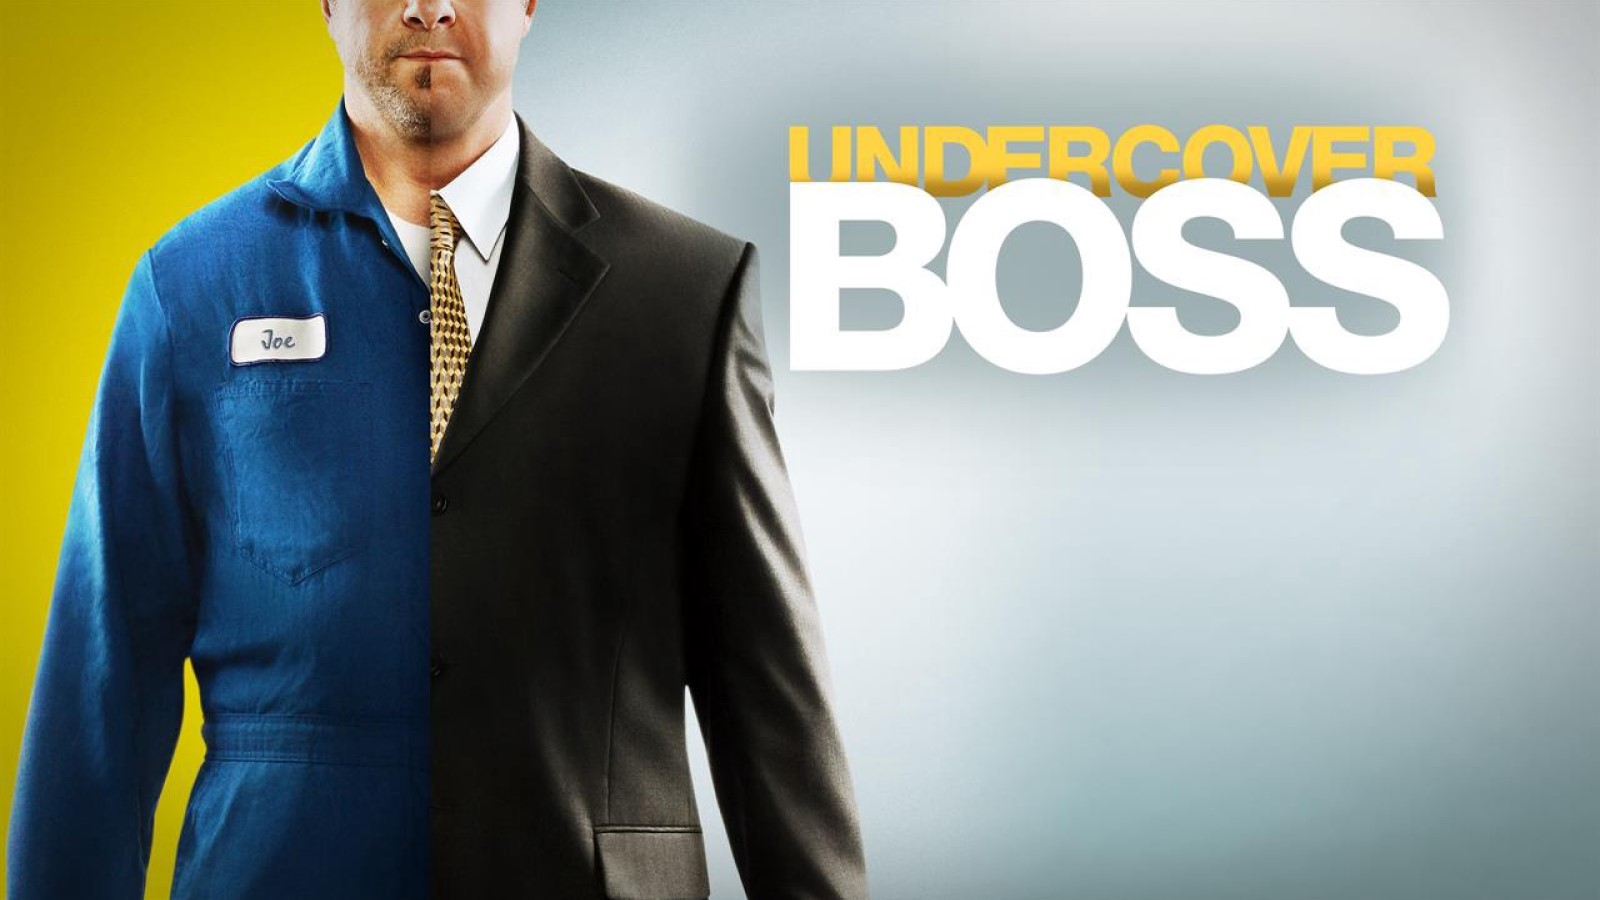 synet Settle Absolut How to Watch 'Undercover Boss' Season 10 on CBS Without Cable - TechNadu